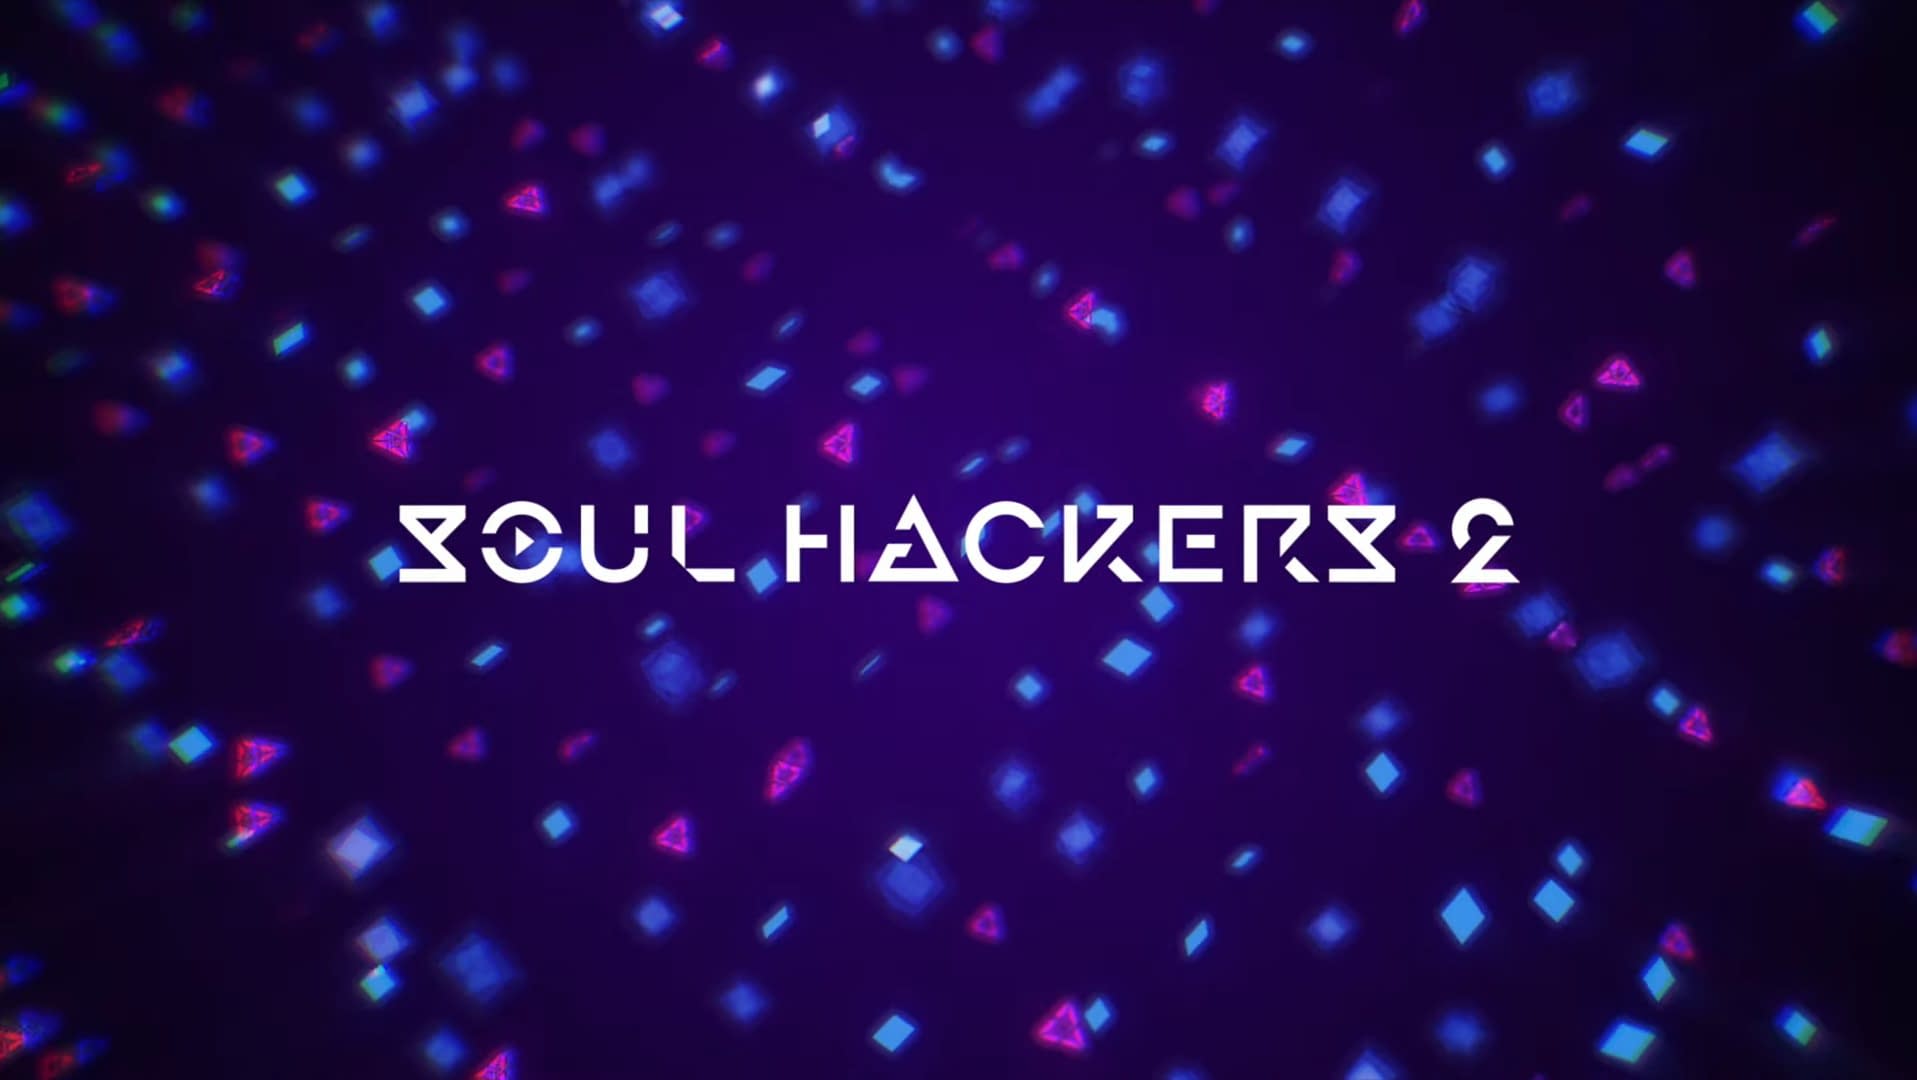 Atlus reveals Soul Hackers 2 trailer for everything but Switch